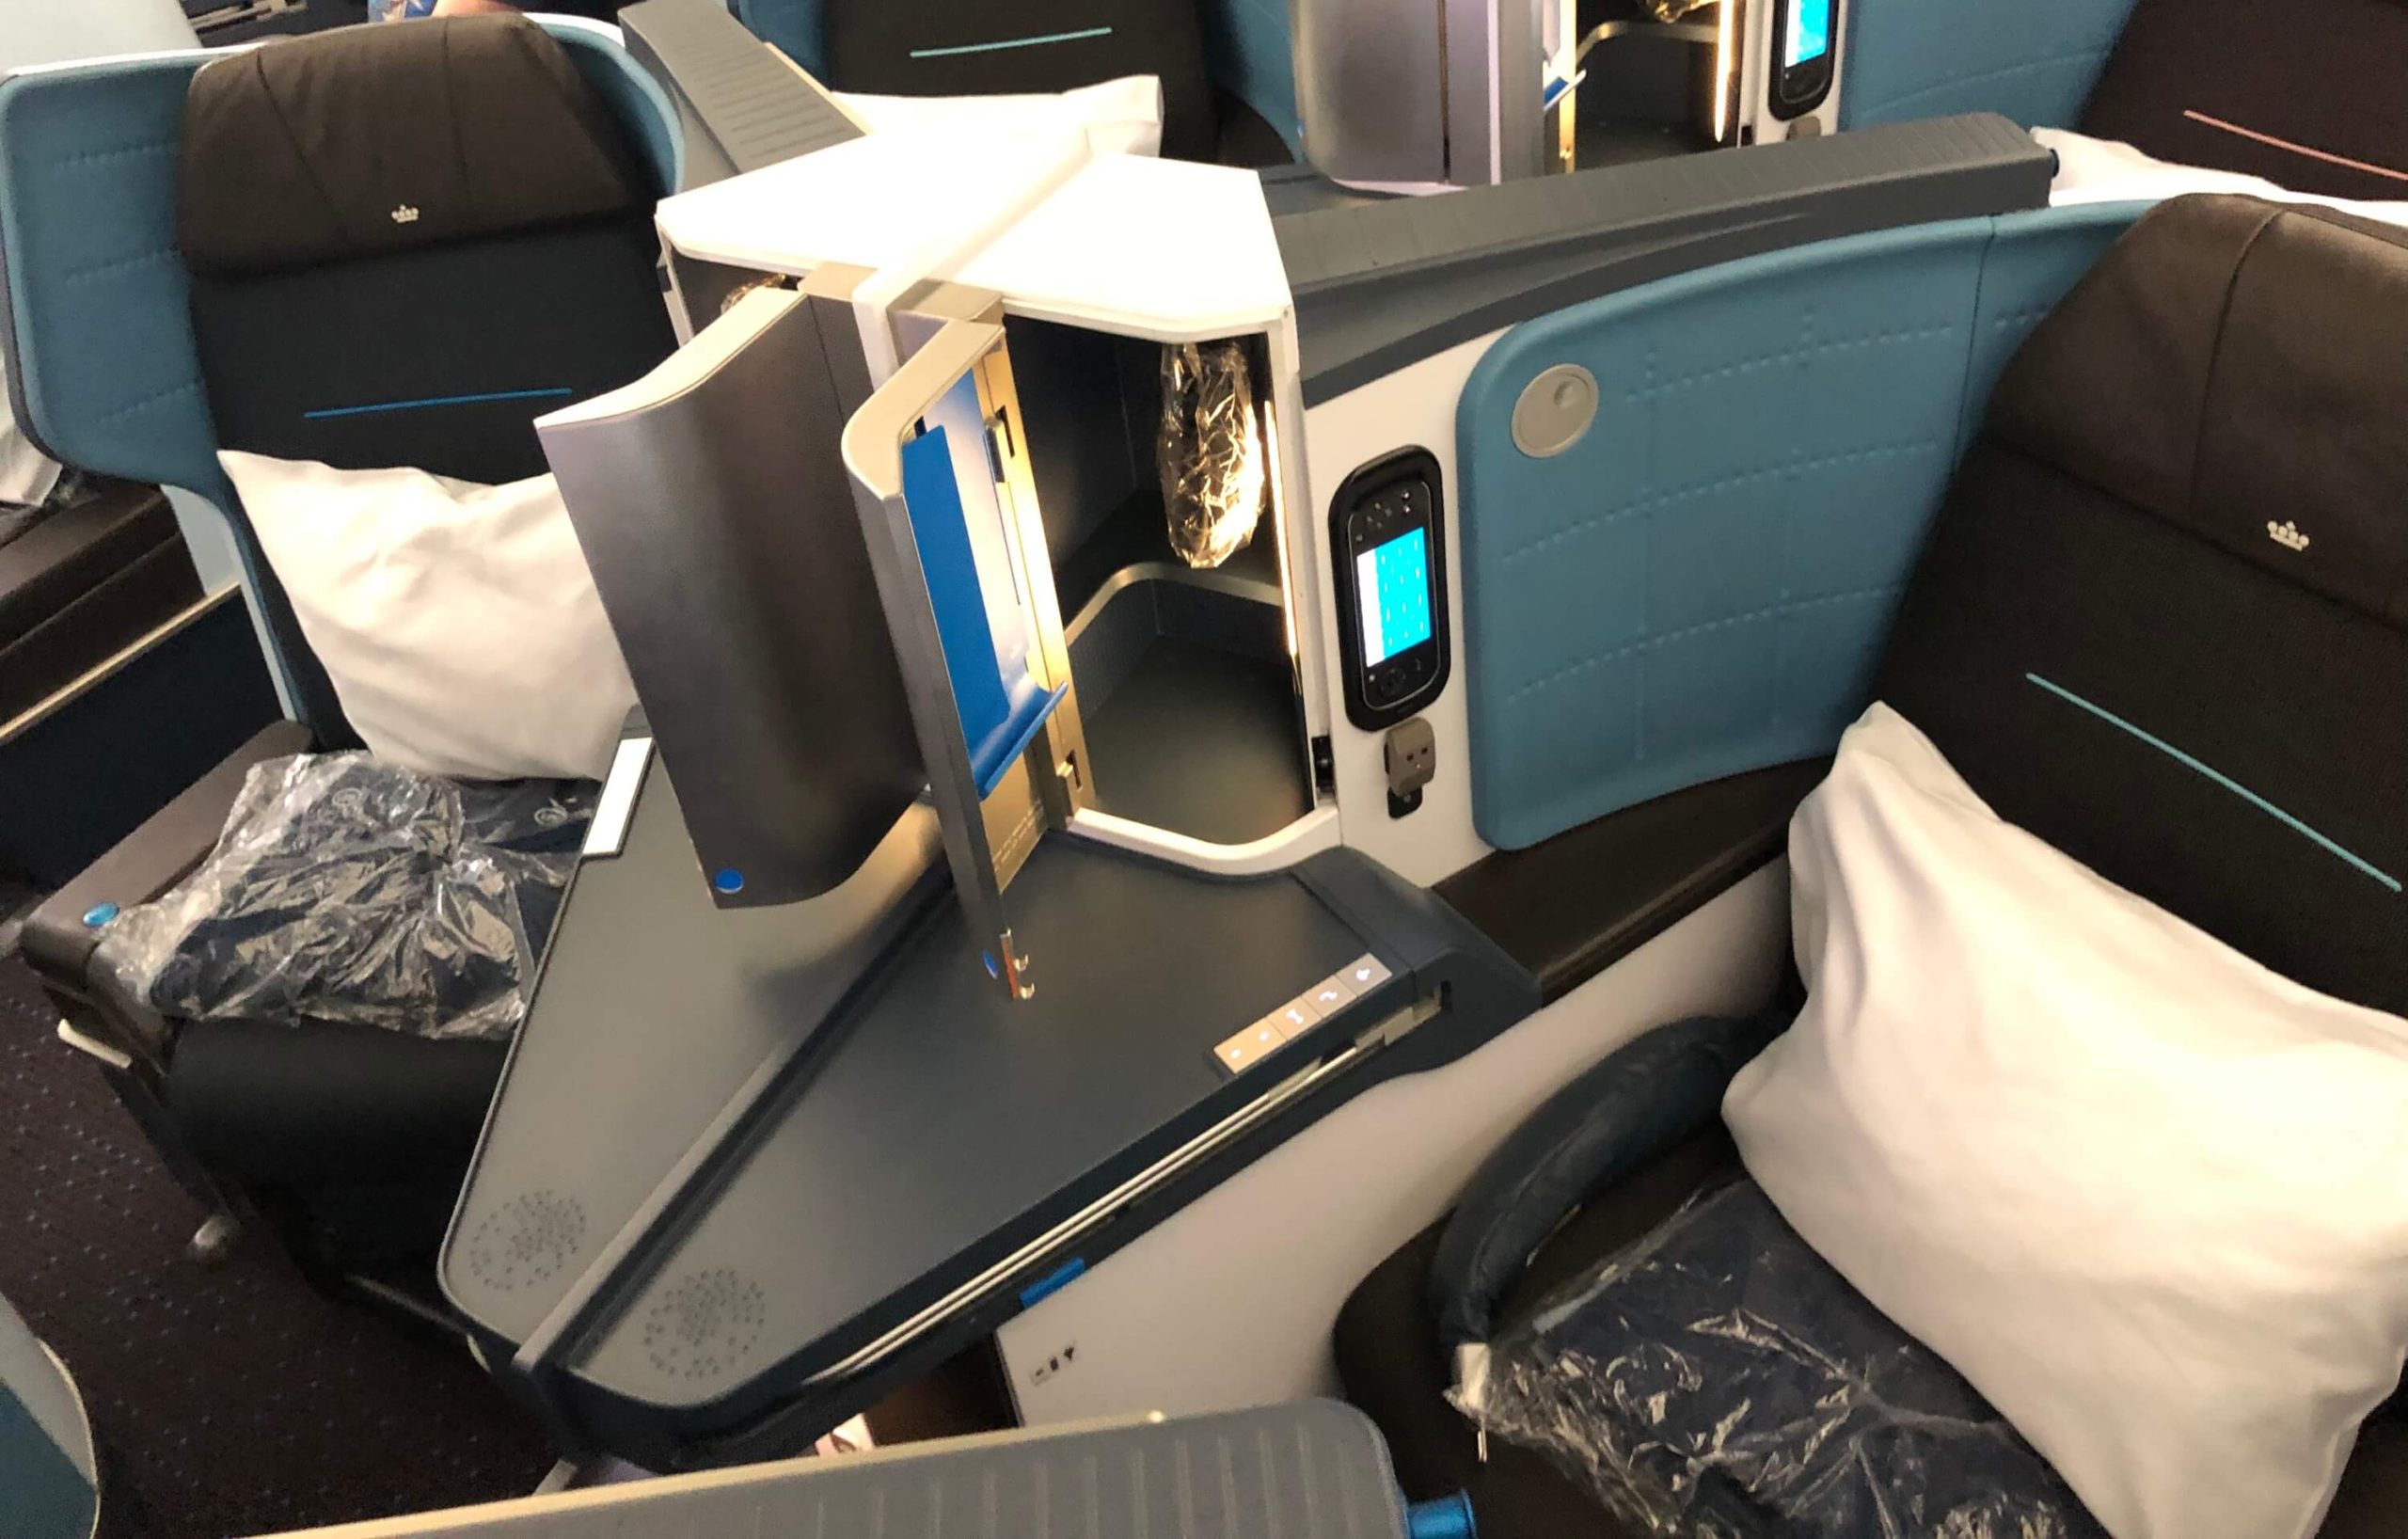 Review KLM Boeing 7879 World Business Class Upon Boarding